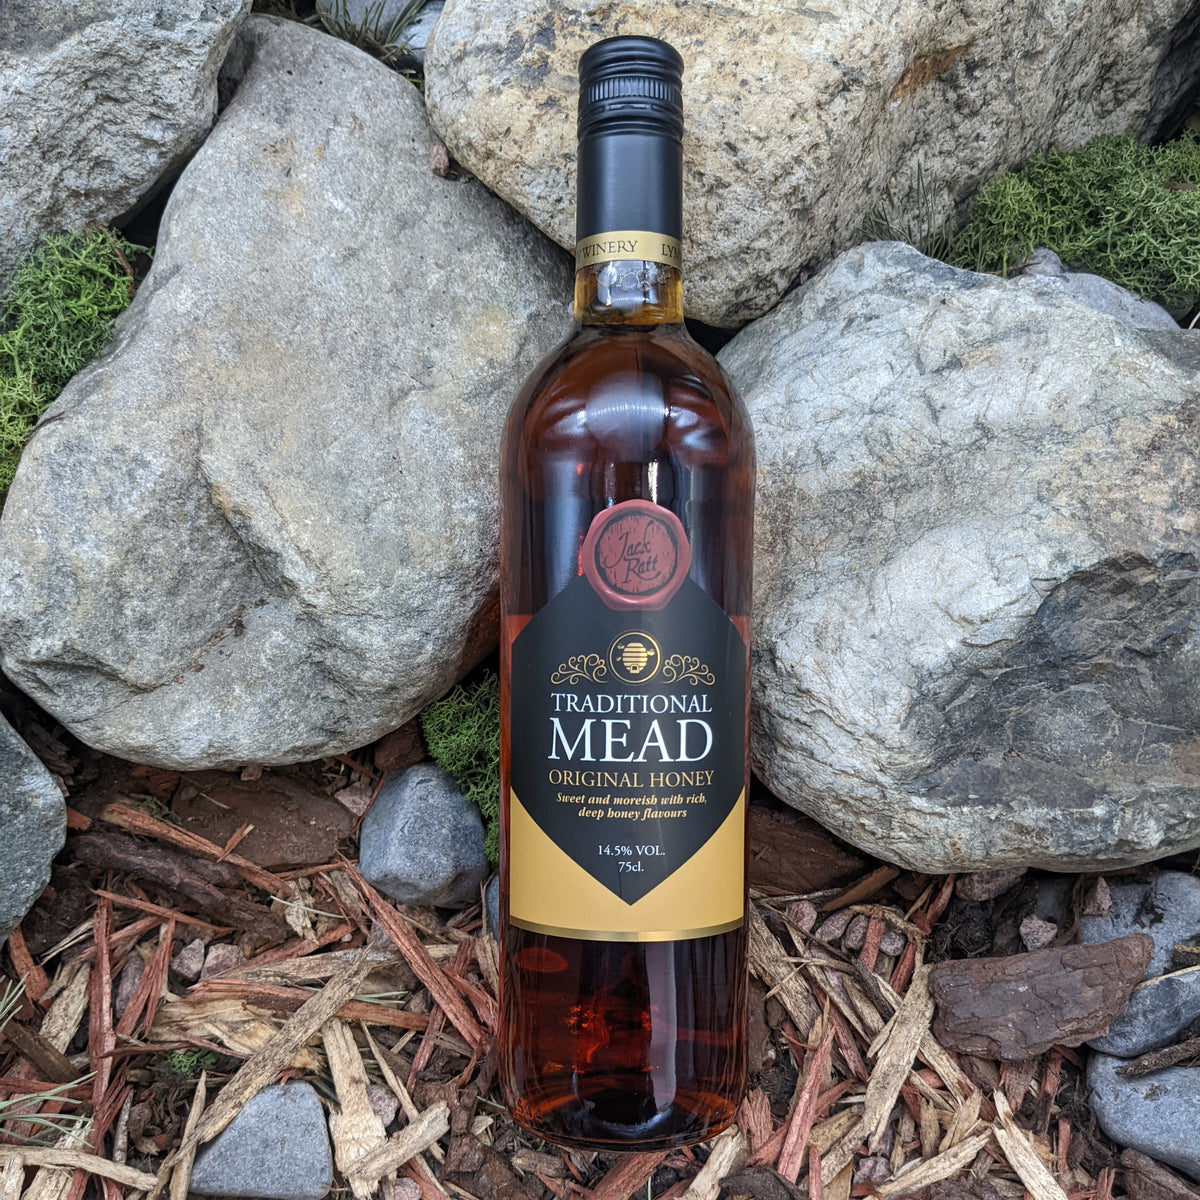 Lyme Bay Traditional Mead 75cl 14.5% VOL